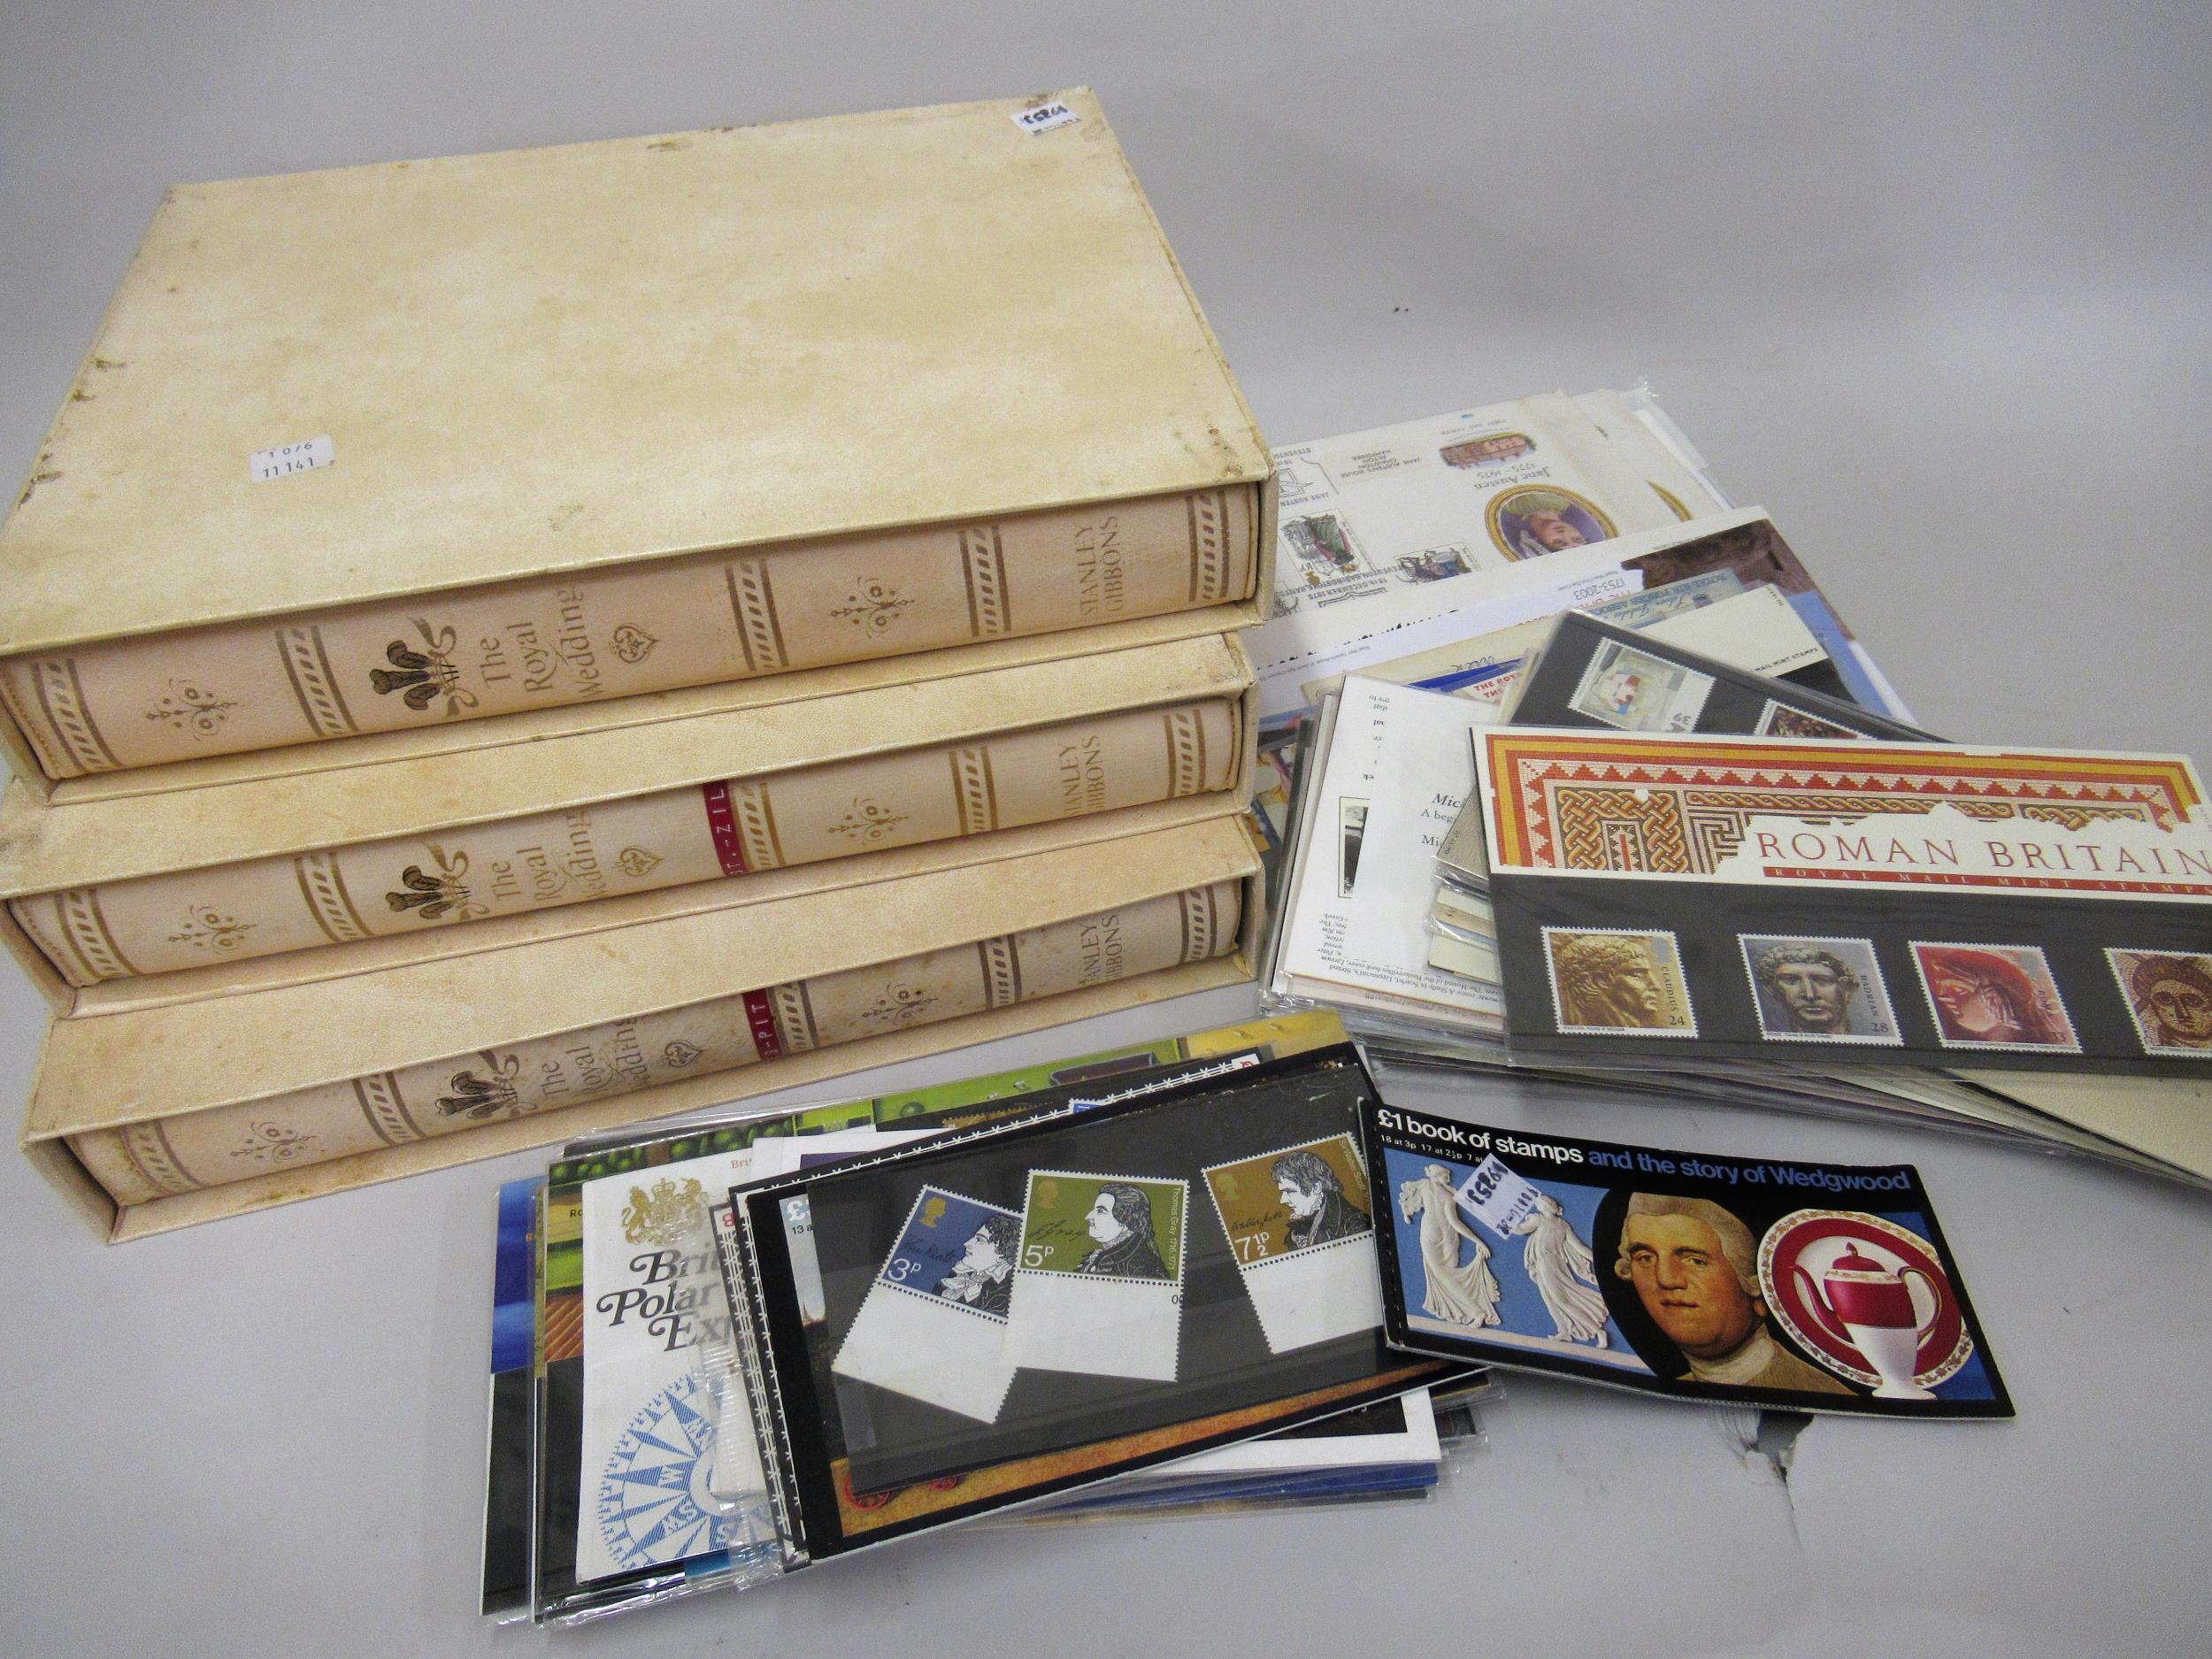 Three slip cased Stanley Gibbons albums containing a collection of stamps celebrating the Royal